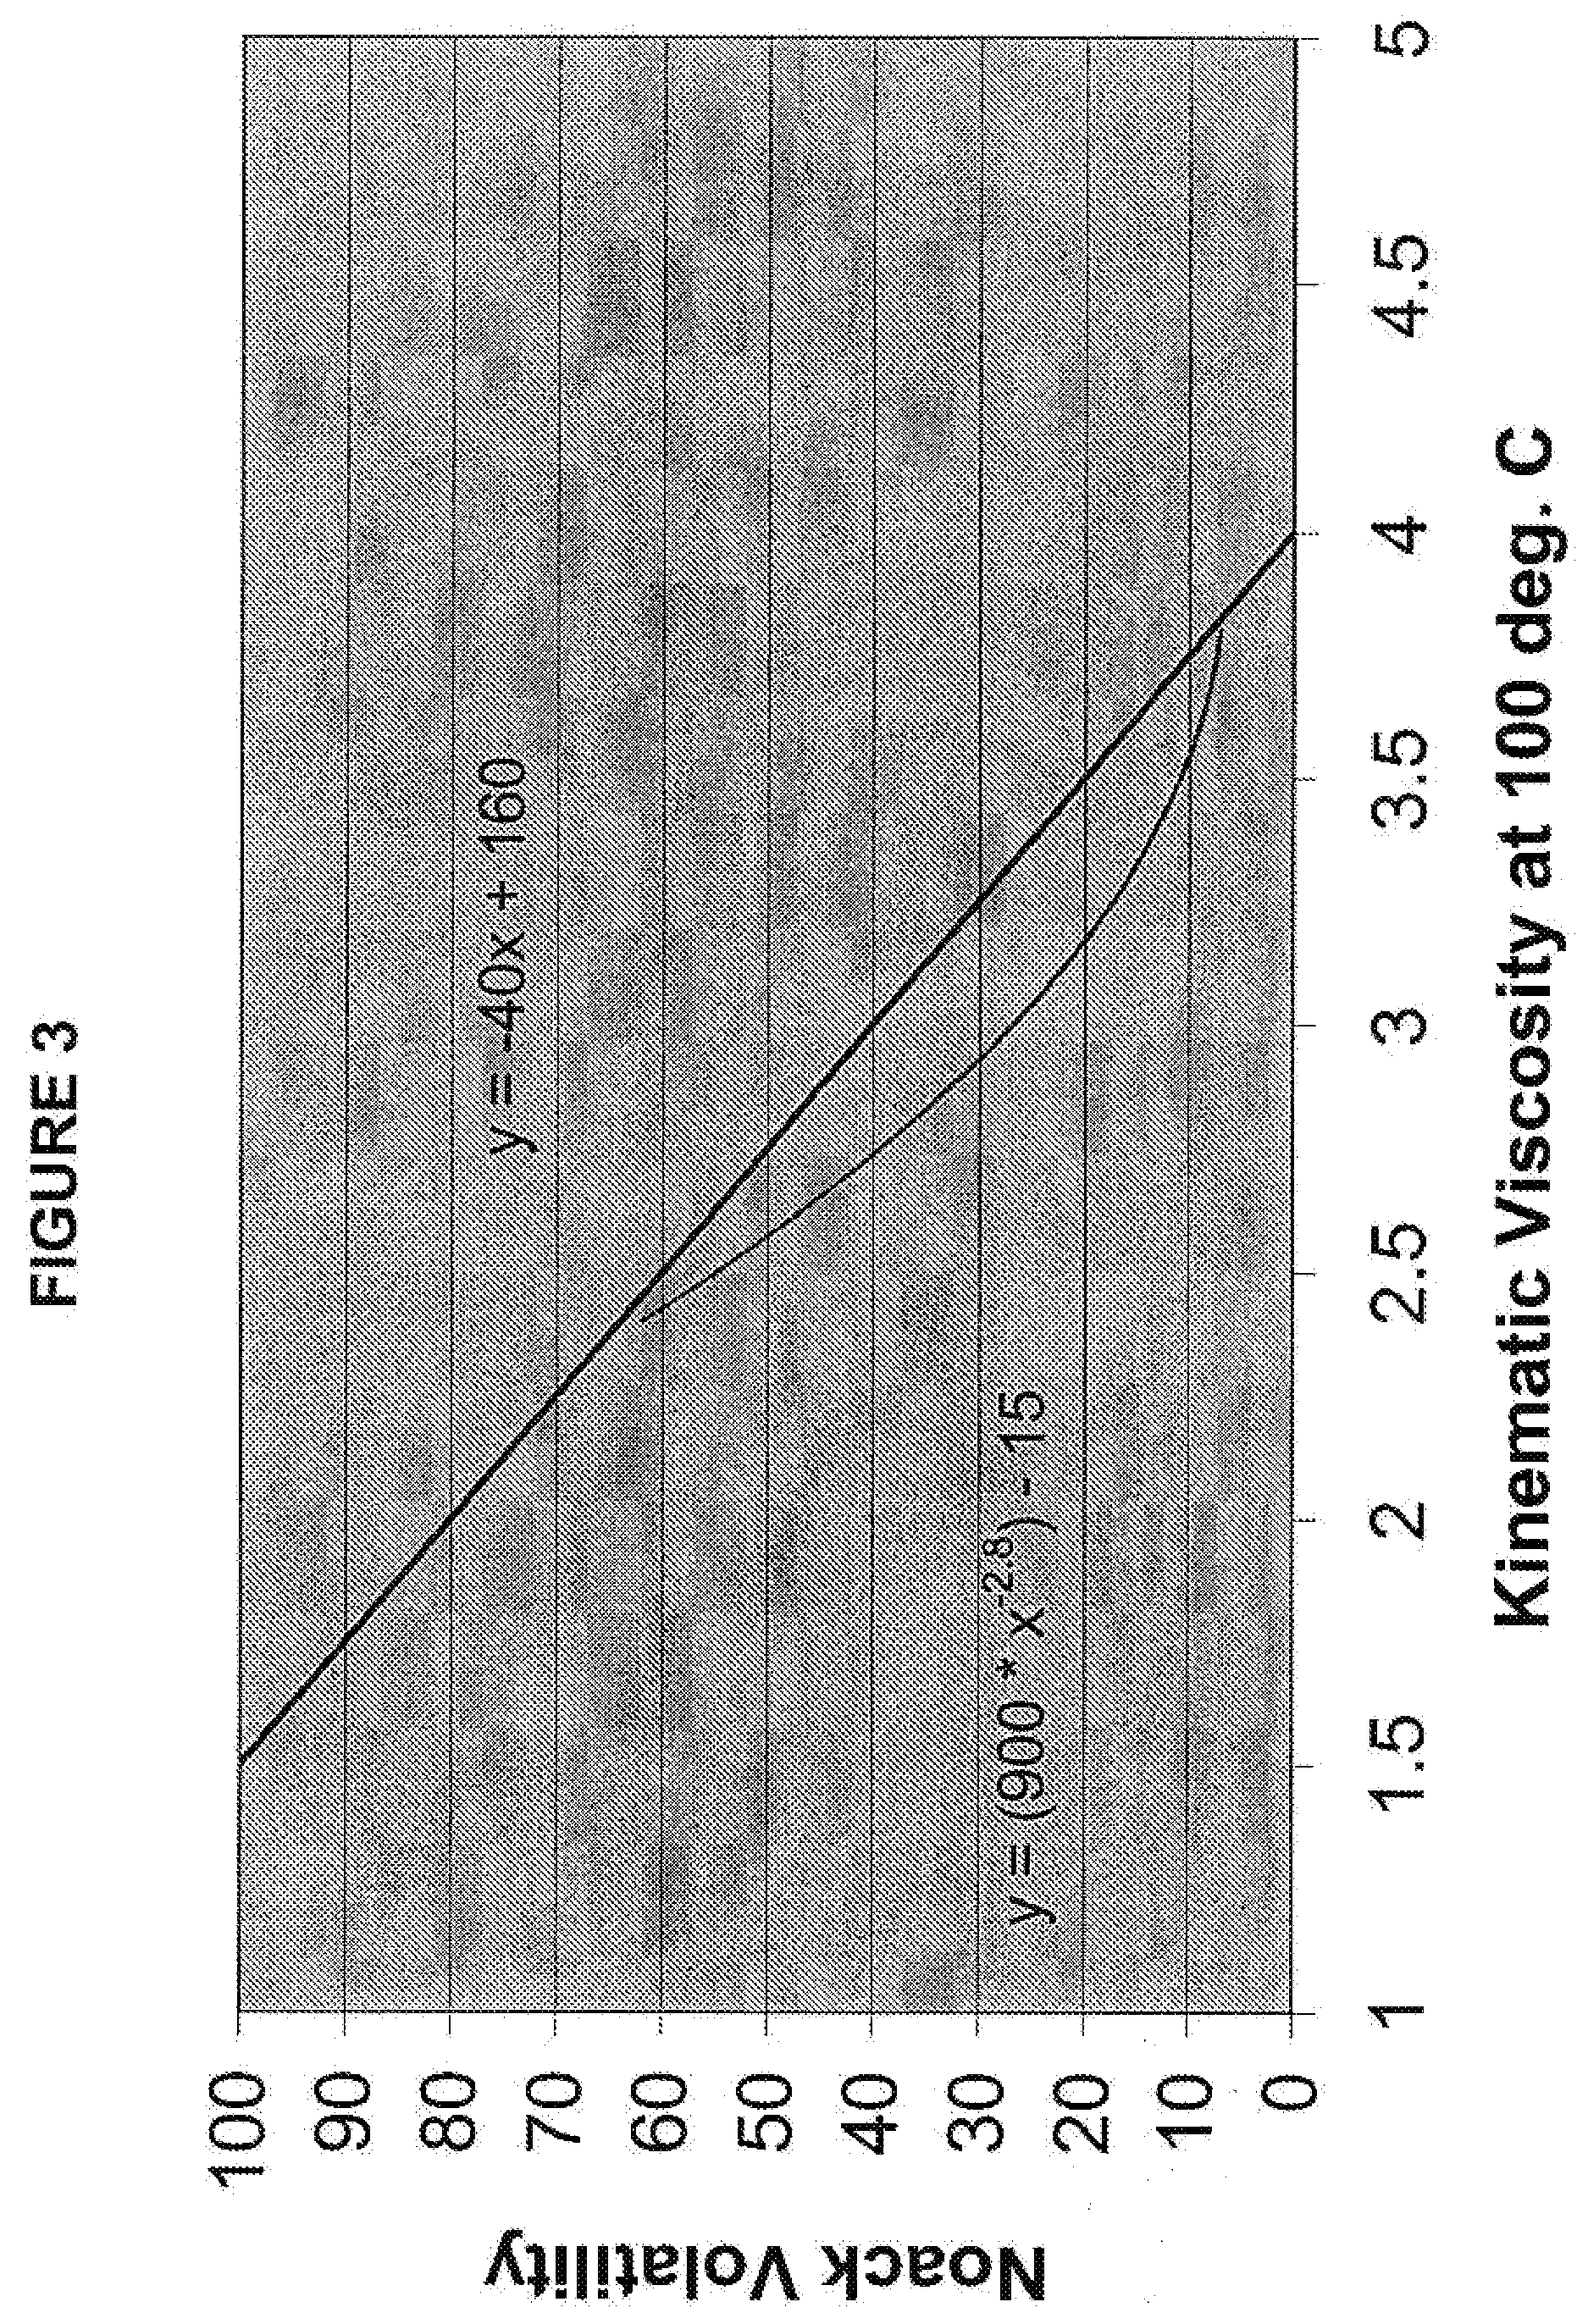 Process for making shock absorber fluid